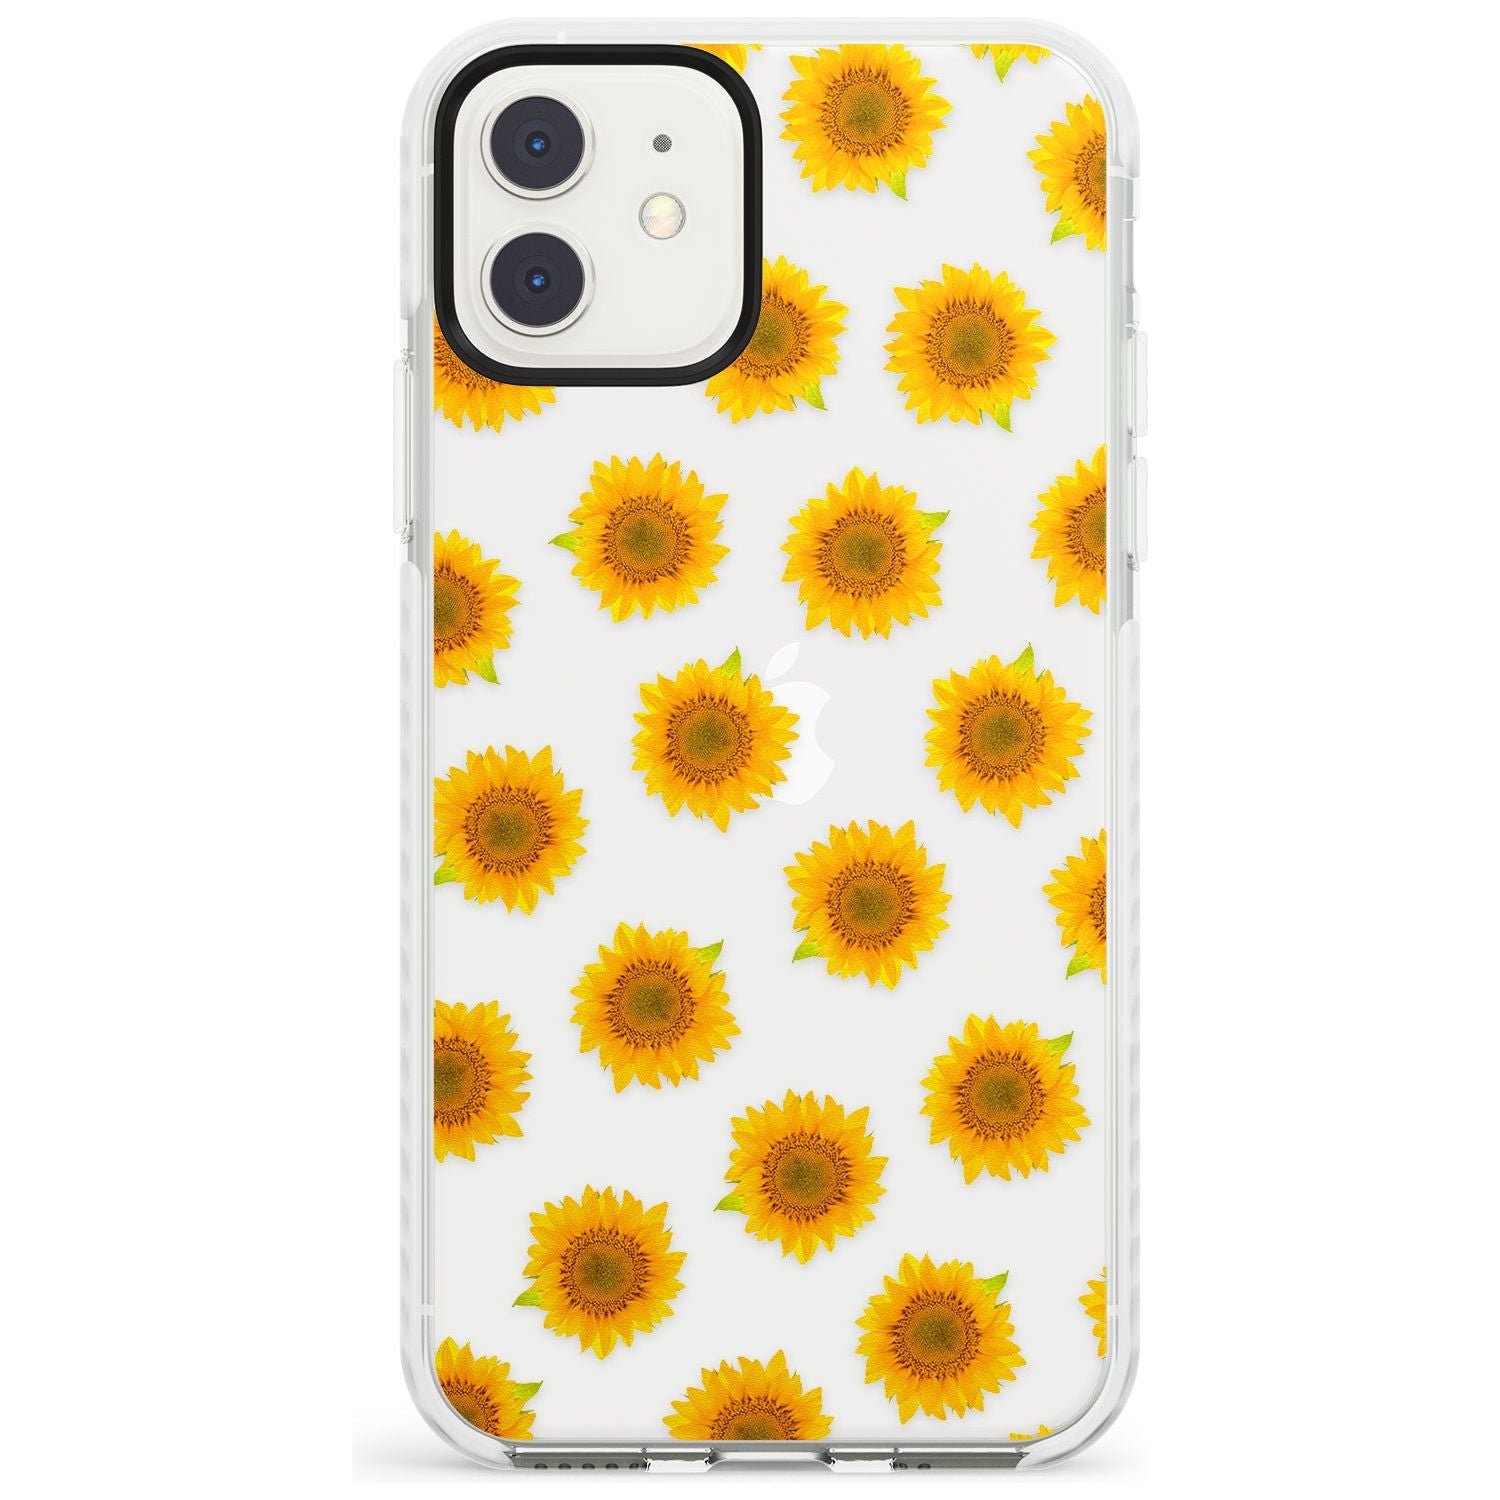 Sunflowers Transparent Pattern Impact Phone Case for iPhone 11